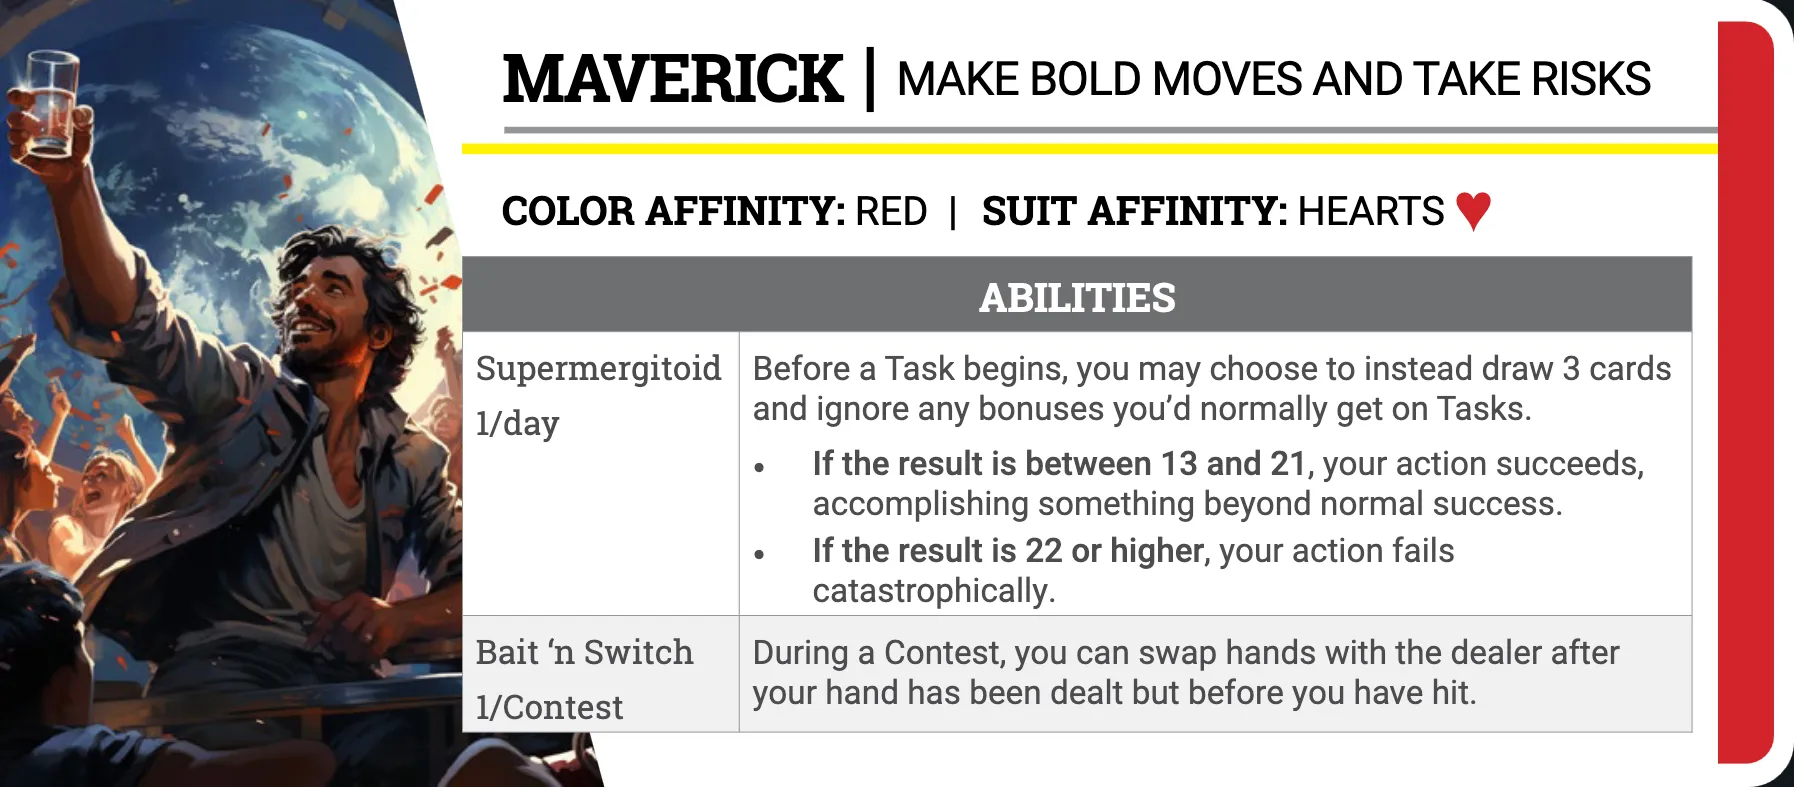 depiction of the maveric Archytype. it's abilities allow you to take risks during tasks and to swap hands with the dealer in contests